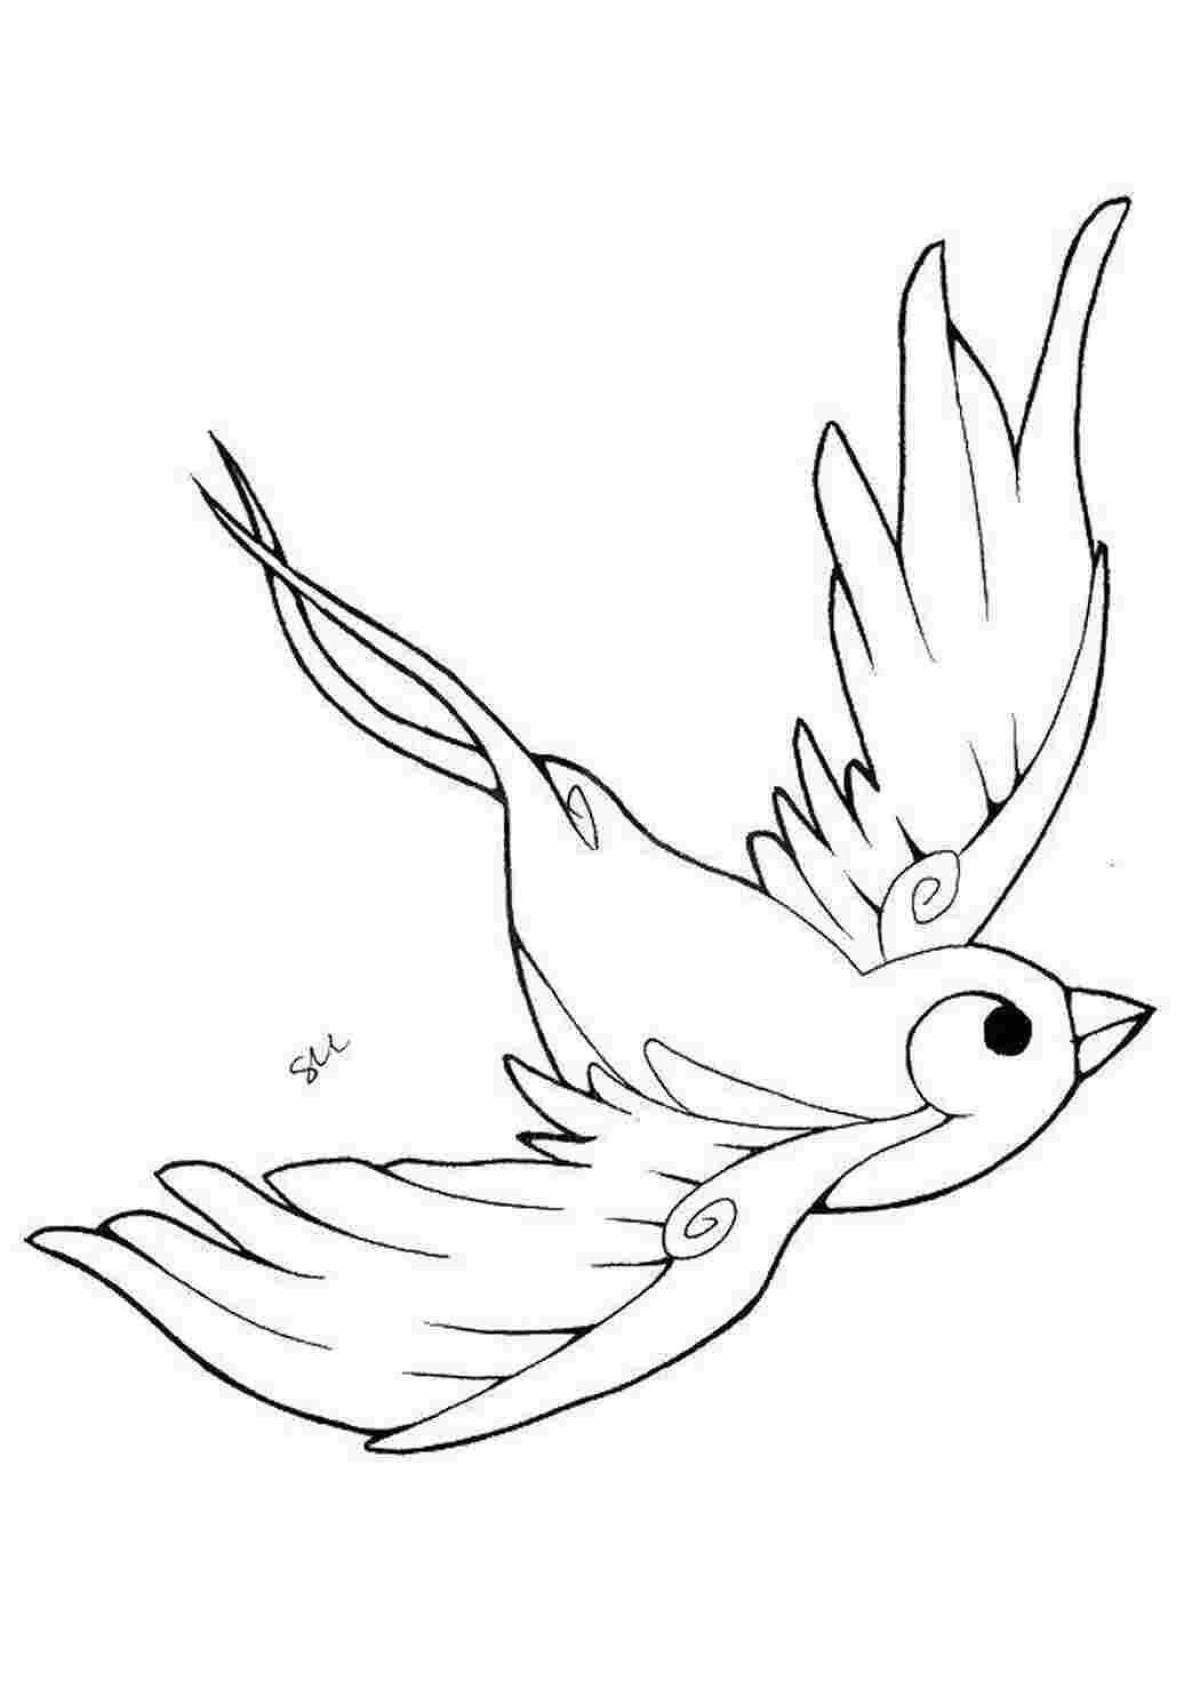 Majestic flying bird coloring page